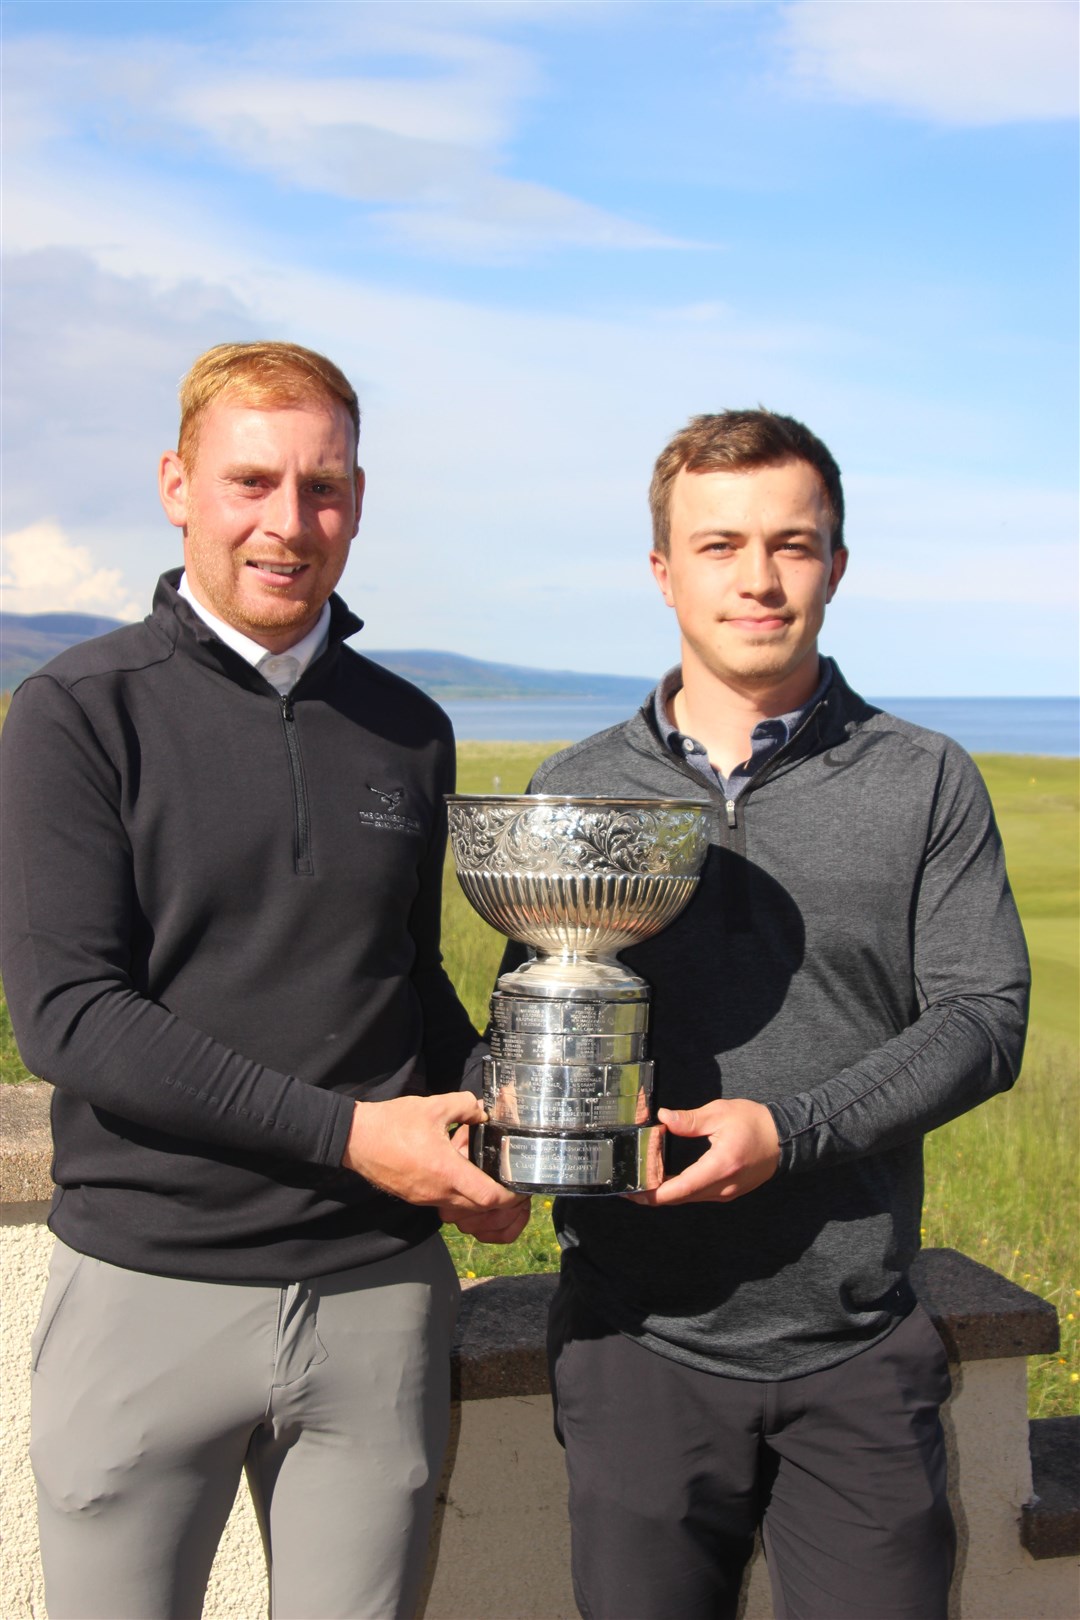 The Royal Dornoch duo with the team trophy Liam MacDonald-MacLeod (left) and North District individual winner Michael Schinkel (right).